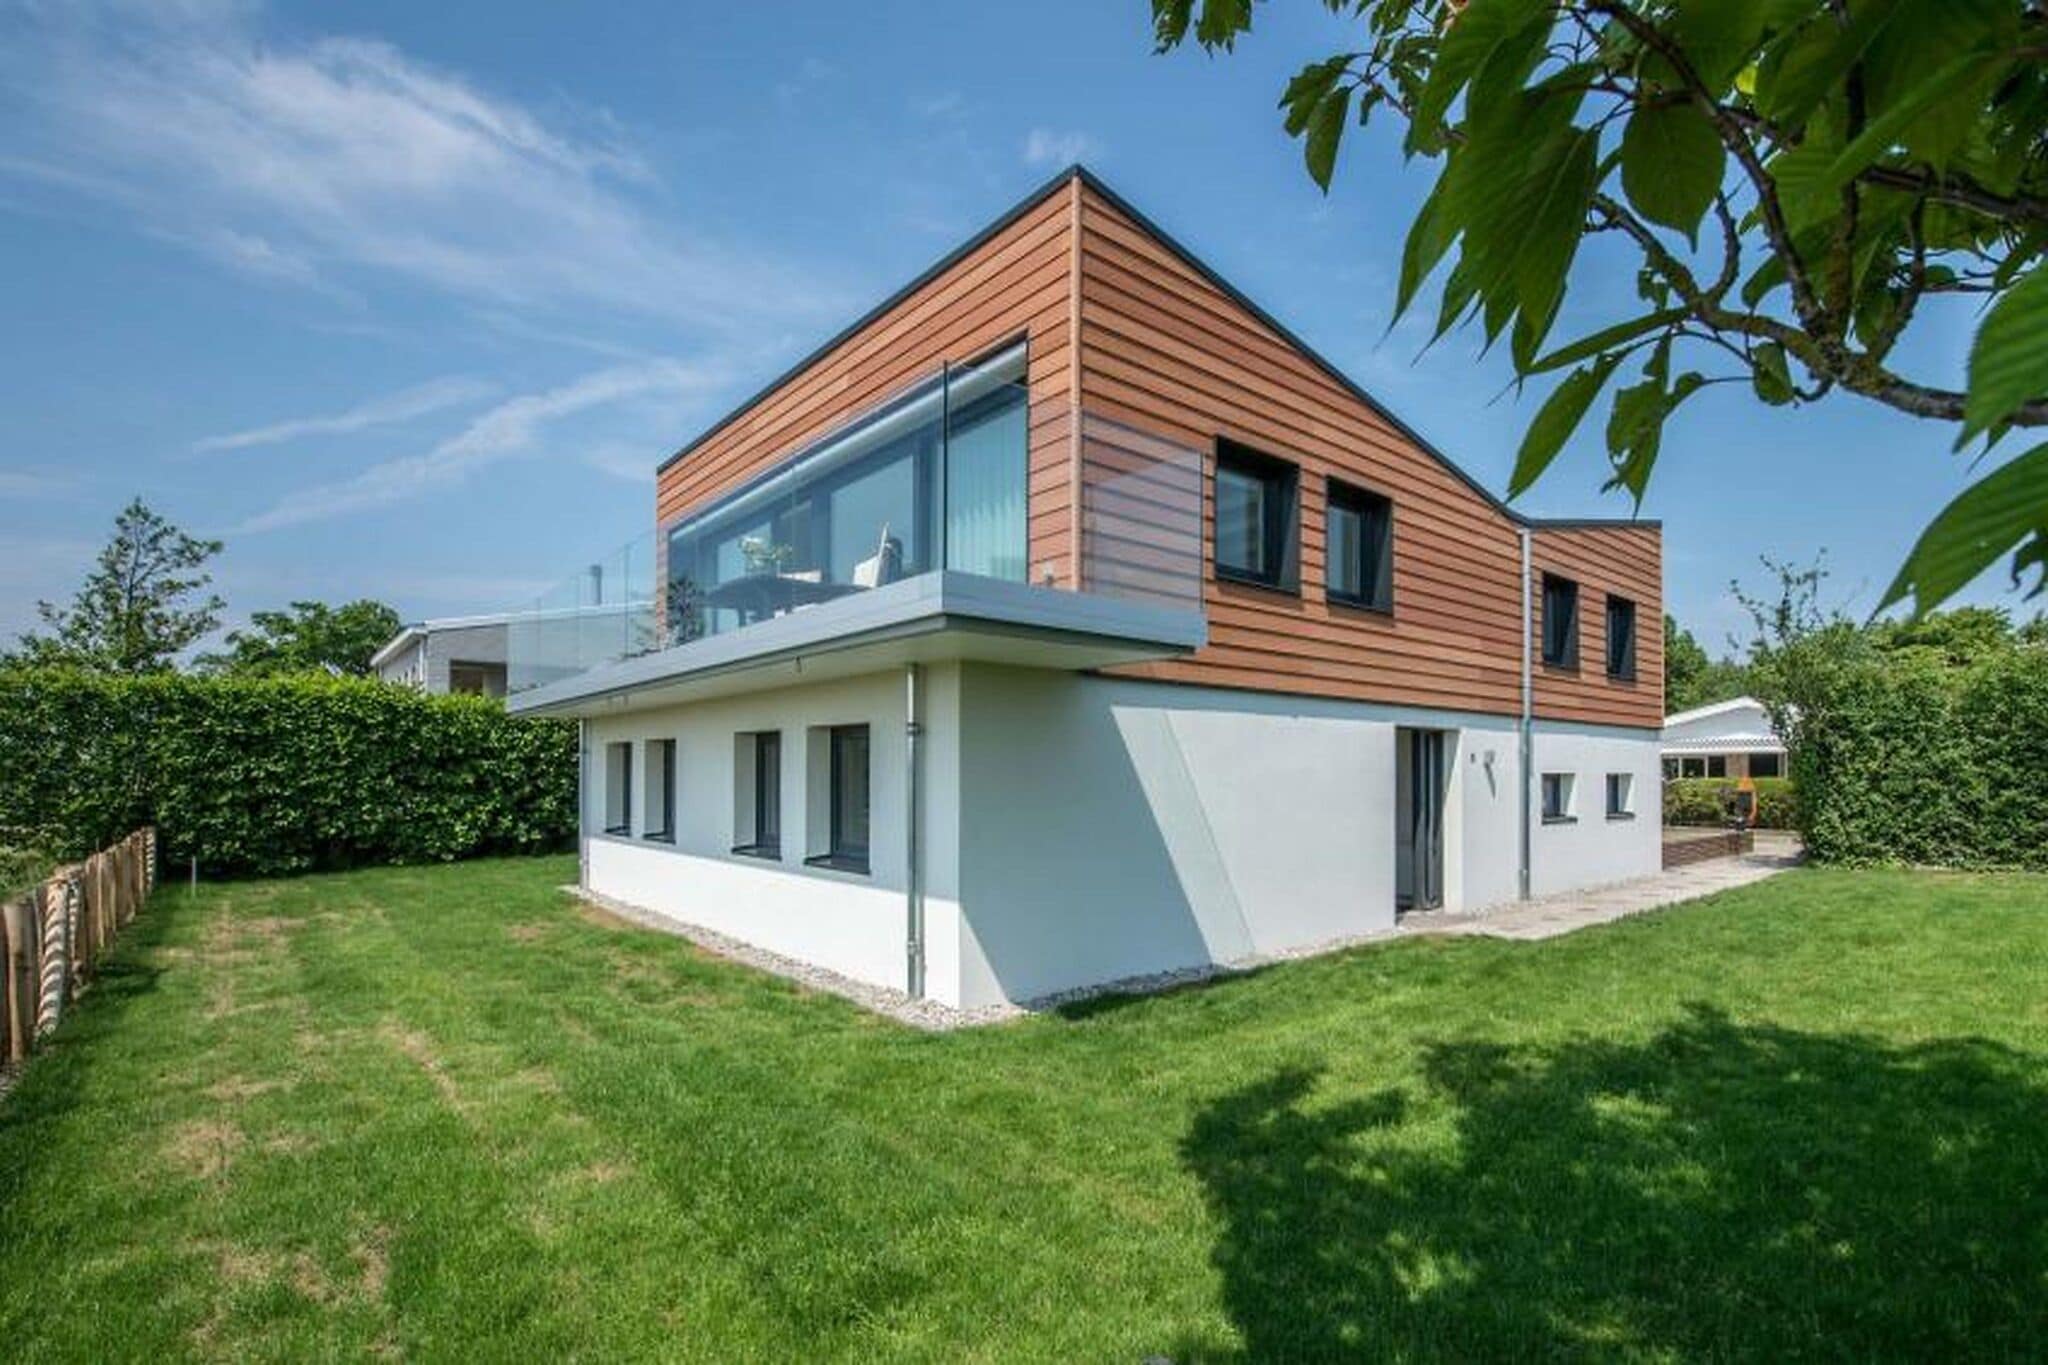 Detached villa with views over Lake Veere